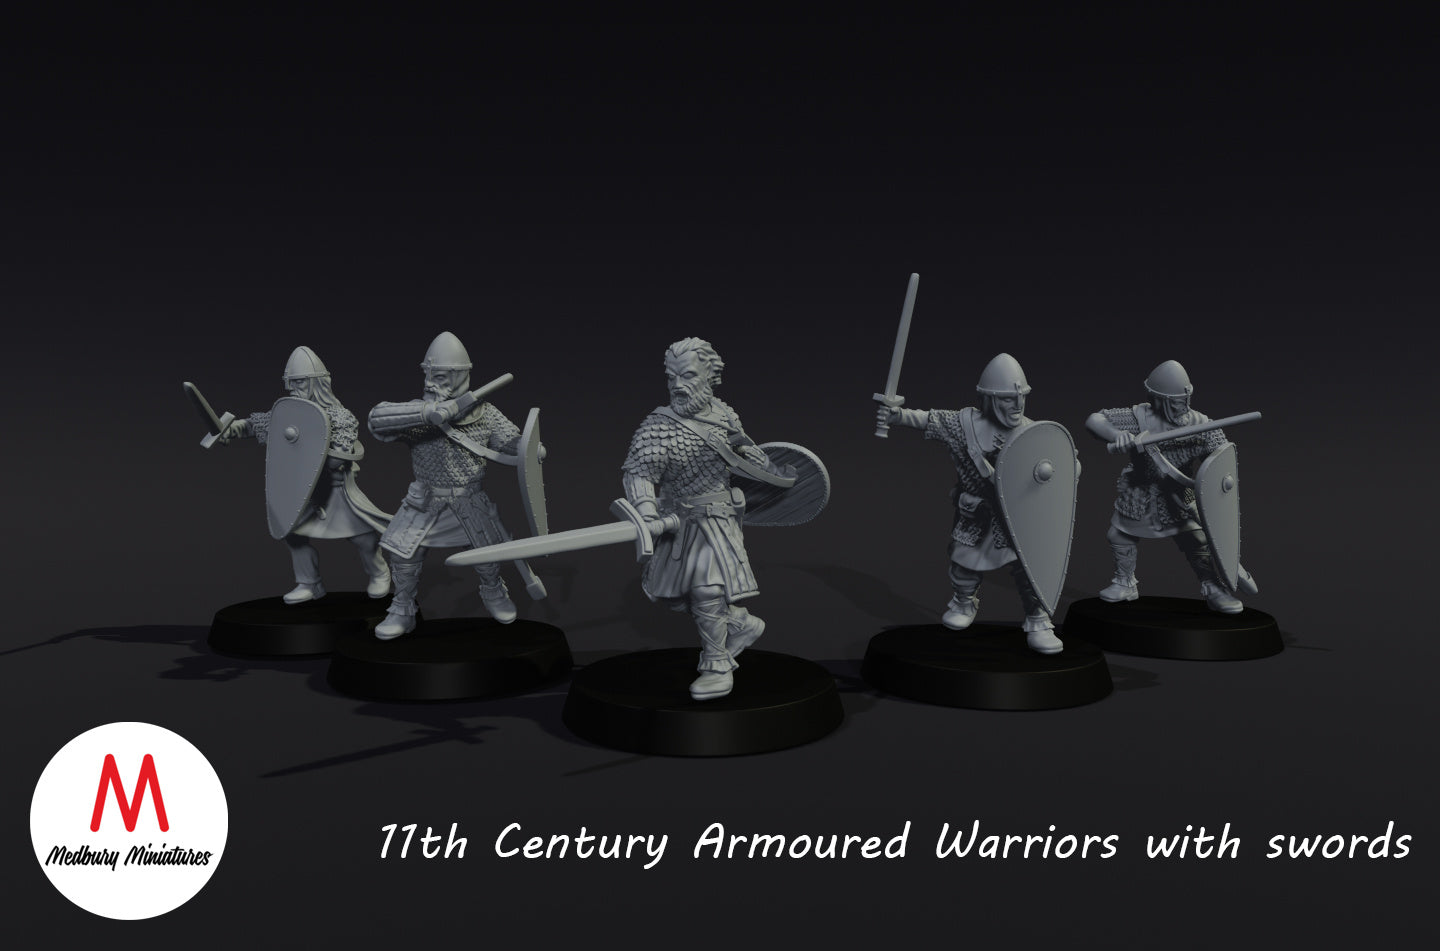 11th Century armoured warriors with swords